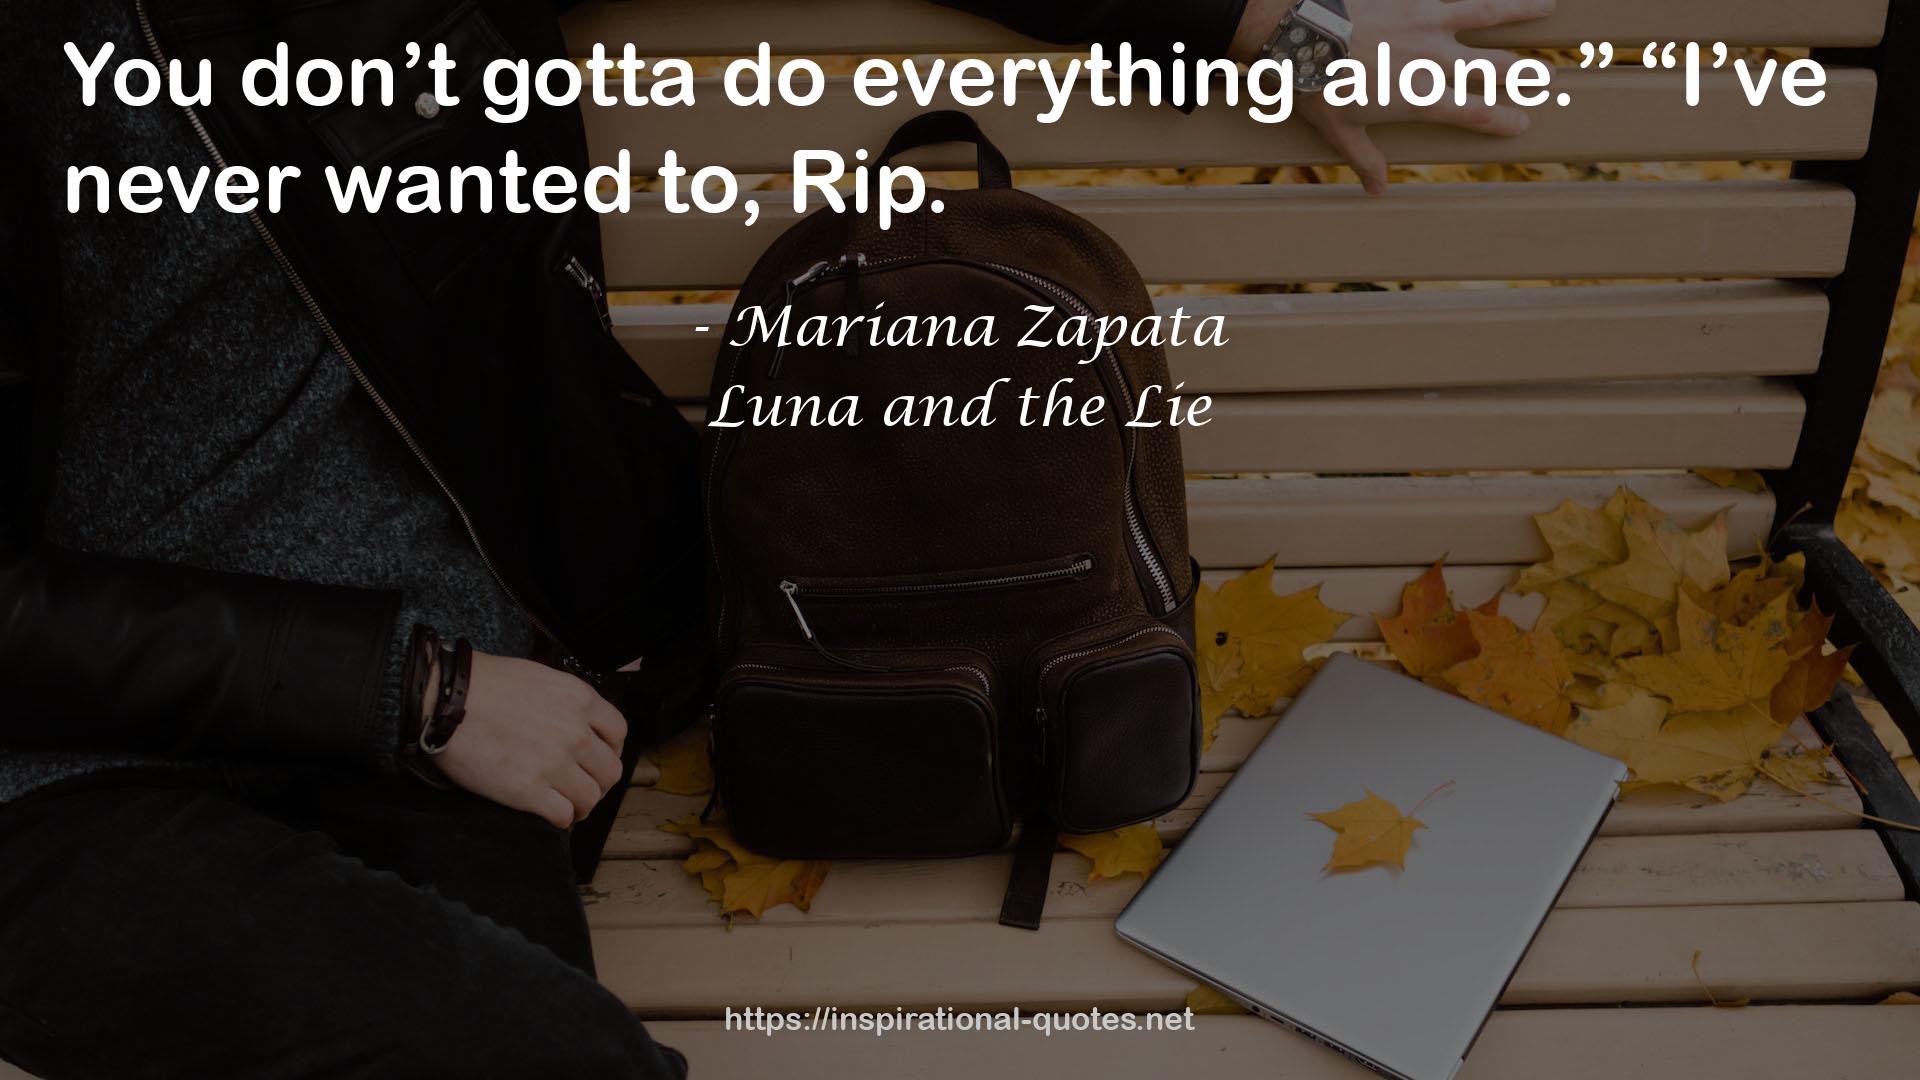 Luna and the Lie QUOTES